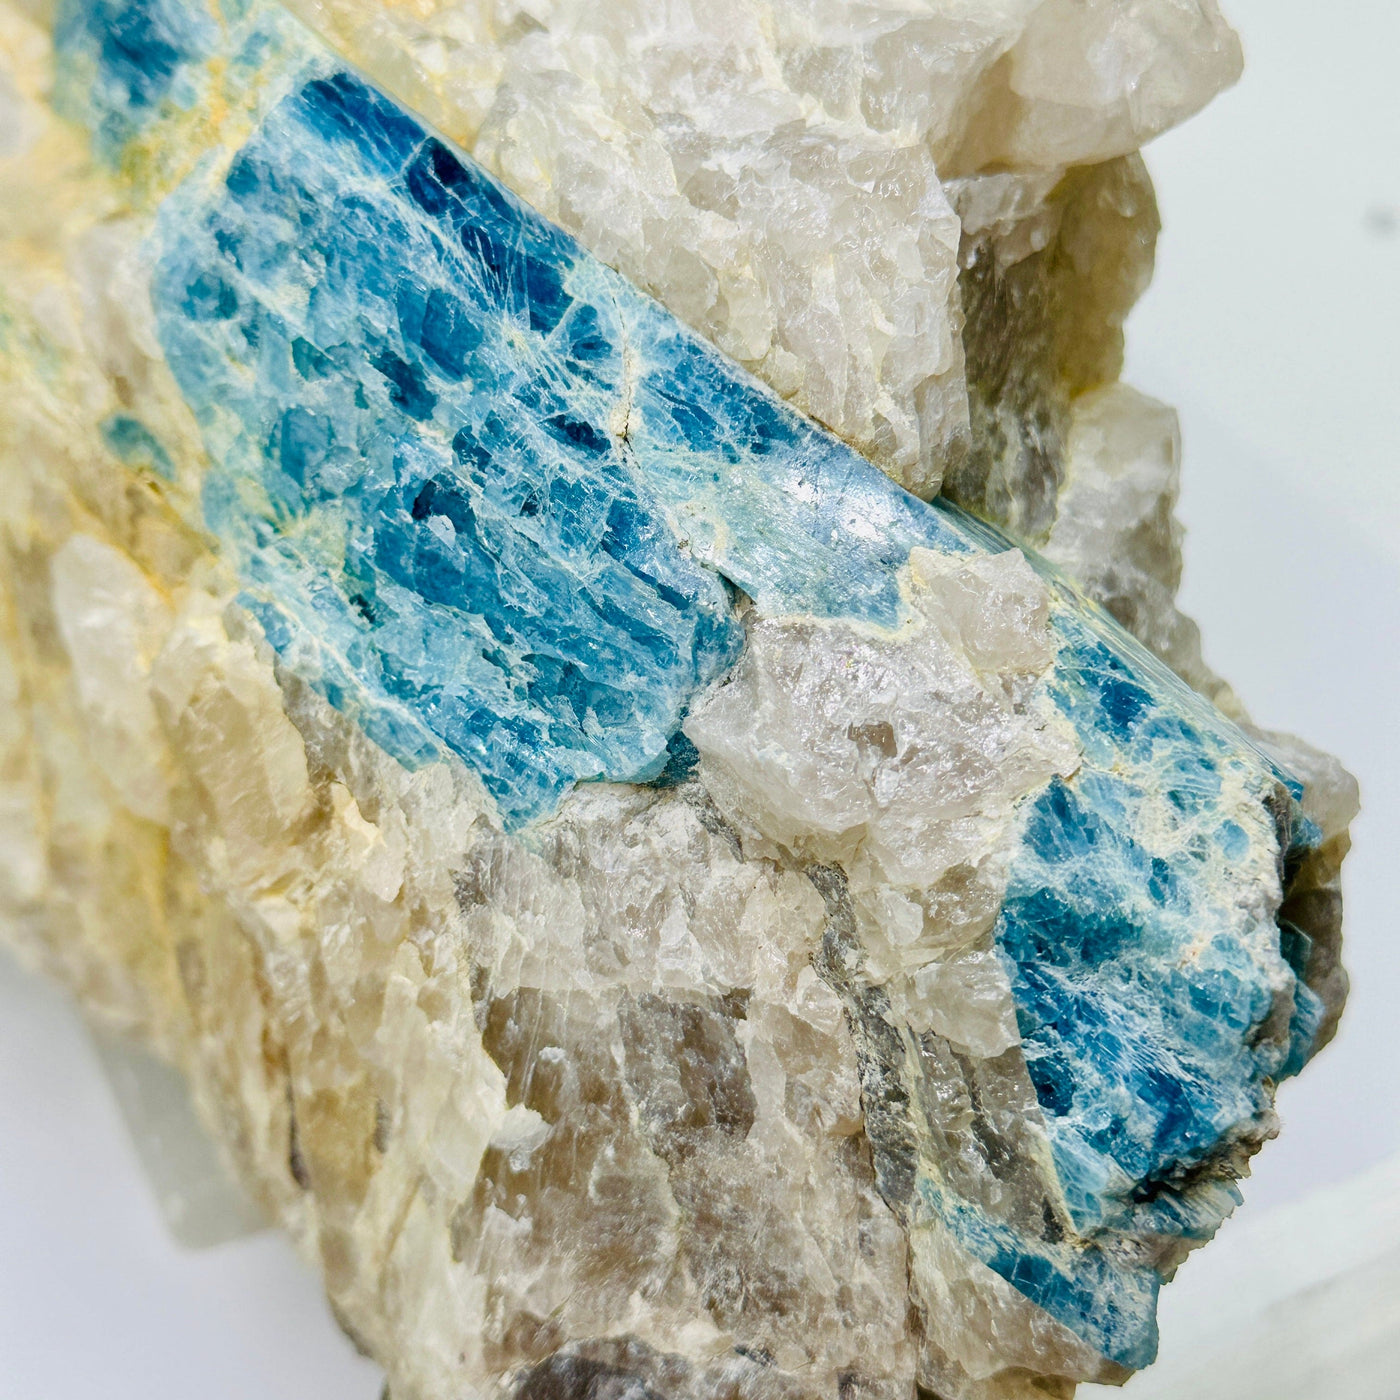 Aquamarine in matrix - giant aquamarine crystal embedded in large natural rough stone close up for detail